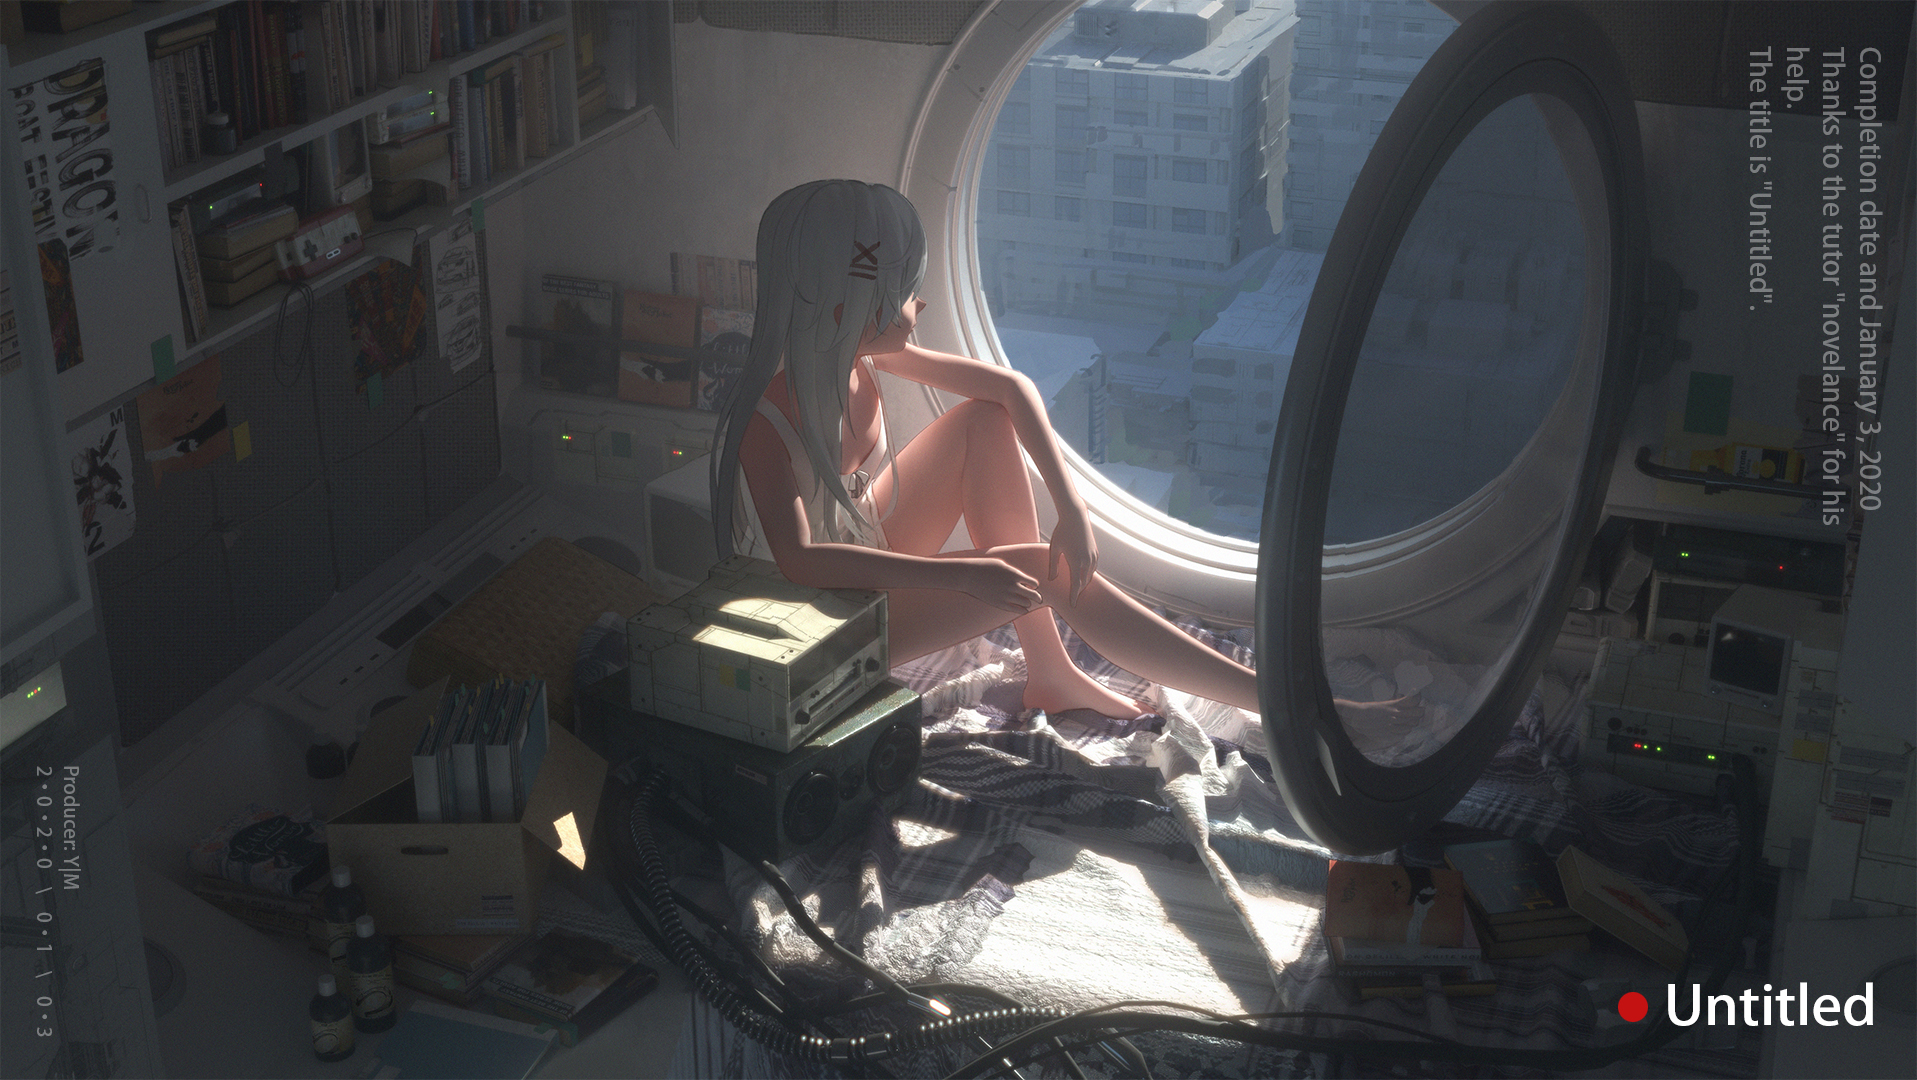 General 1917x1080 looking out window city wires computer blankets bottles digital art watermarked window box books by the window sunlight Y|M floor messy indoors women indoors hair ornament long hair technology shelves building pointed toes cardboard box